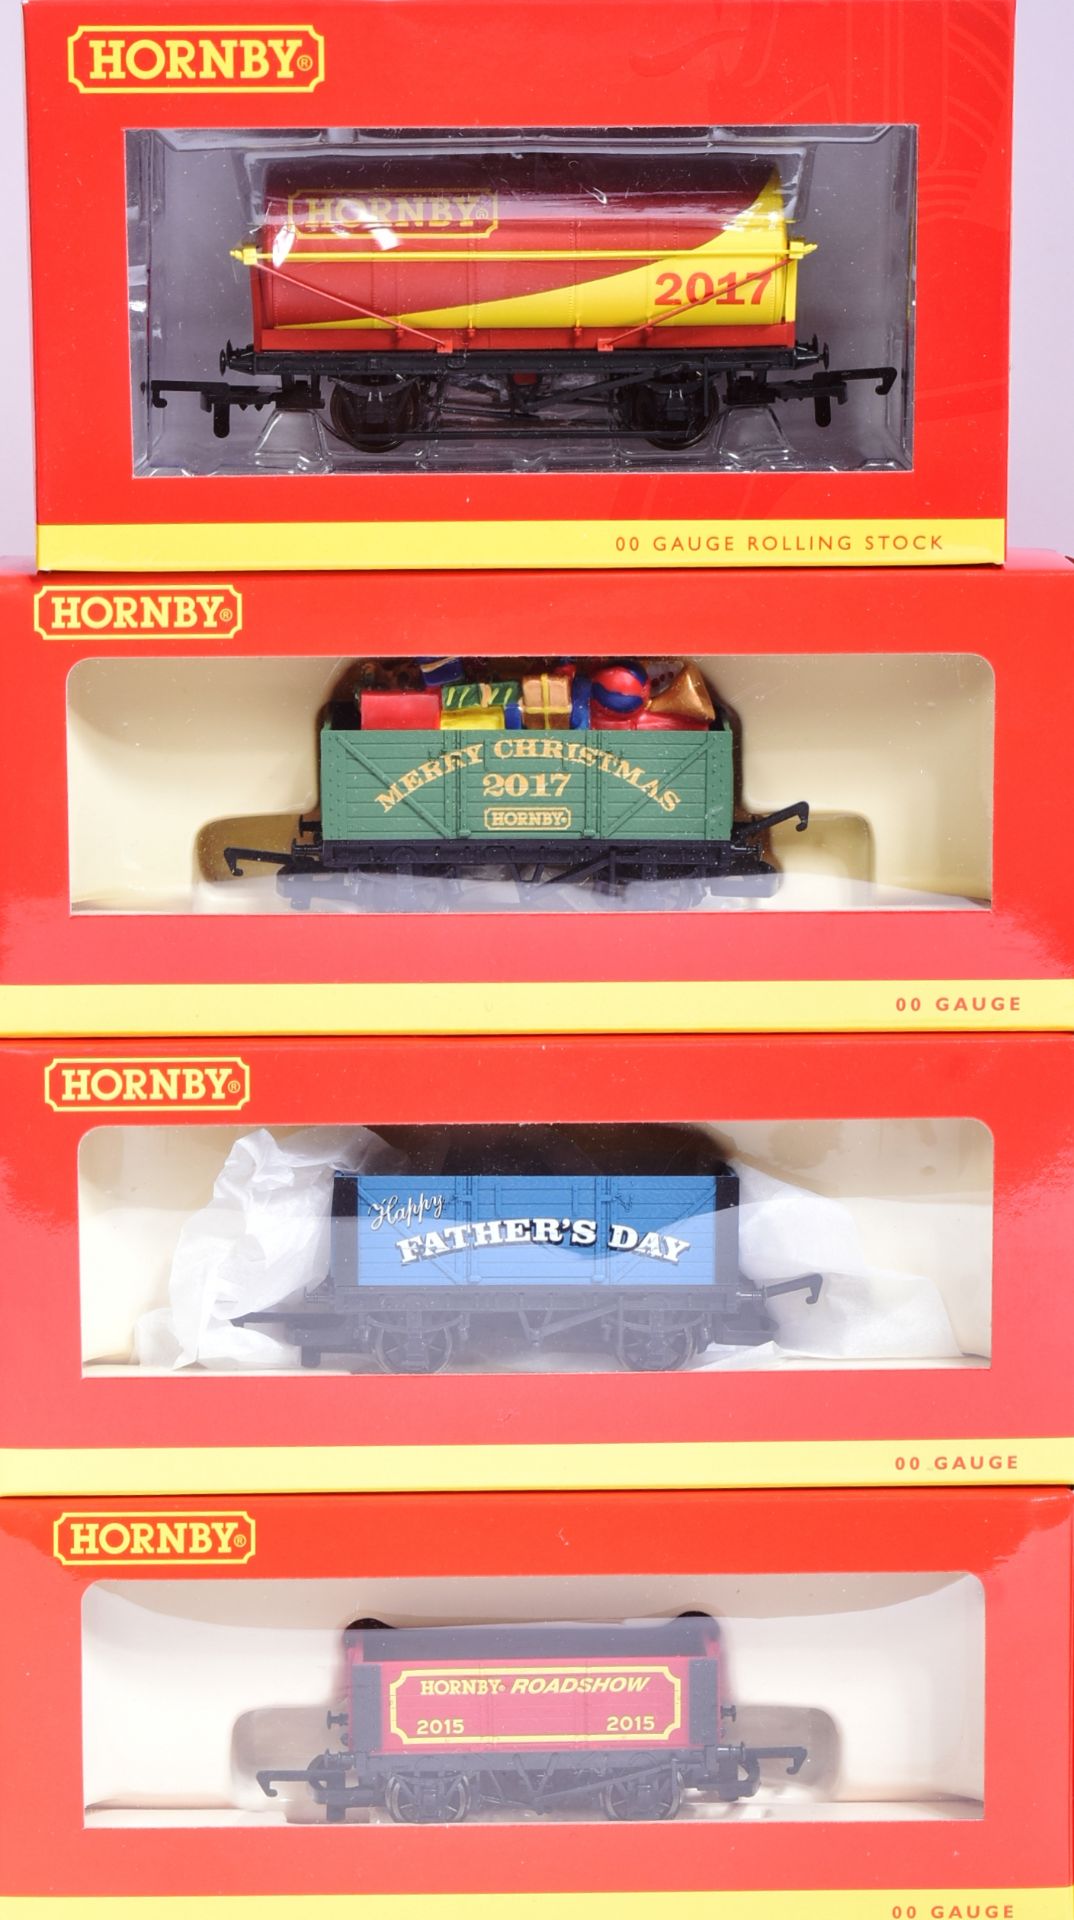 MODEL RAILWAY - COLLECTION OF VINTAGE HORNBY OO GAUGE WAGONS - Image 3 of 5